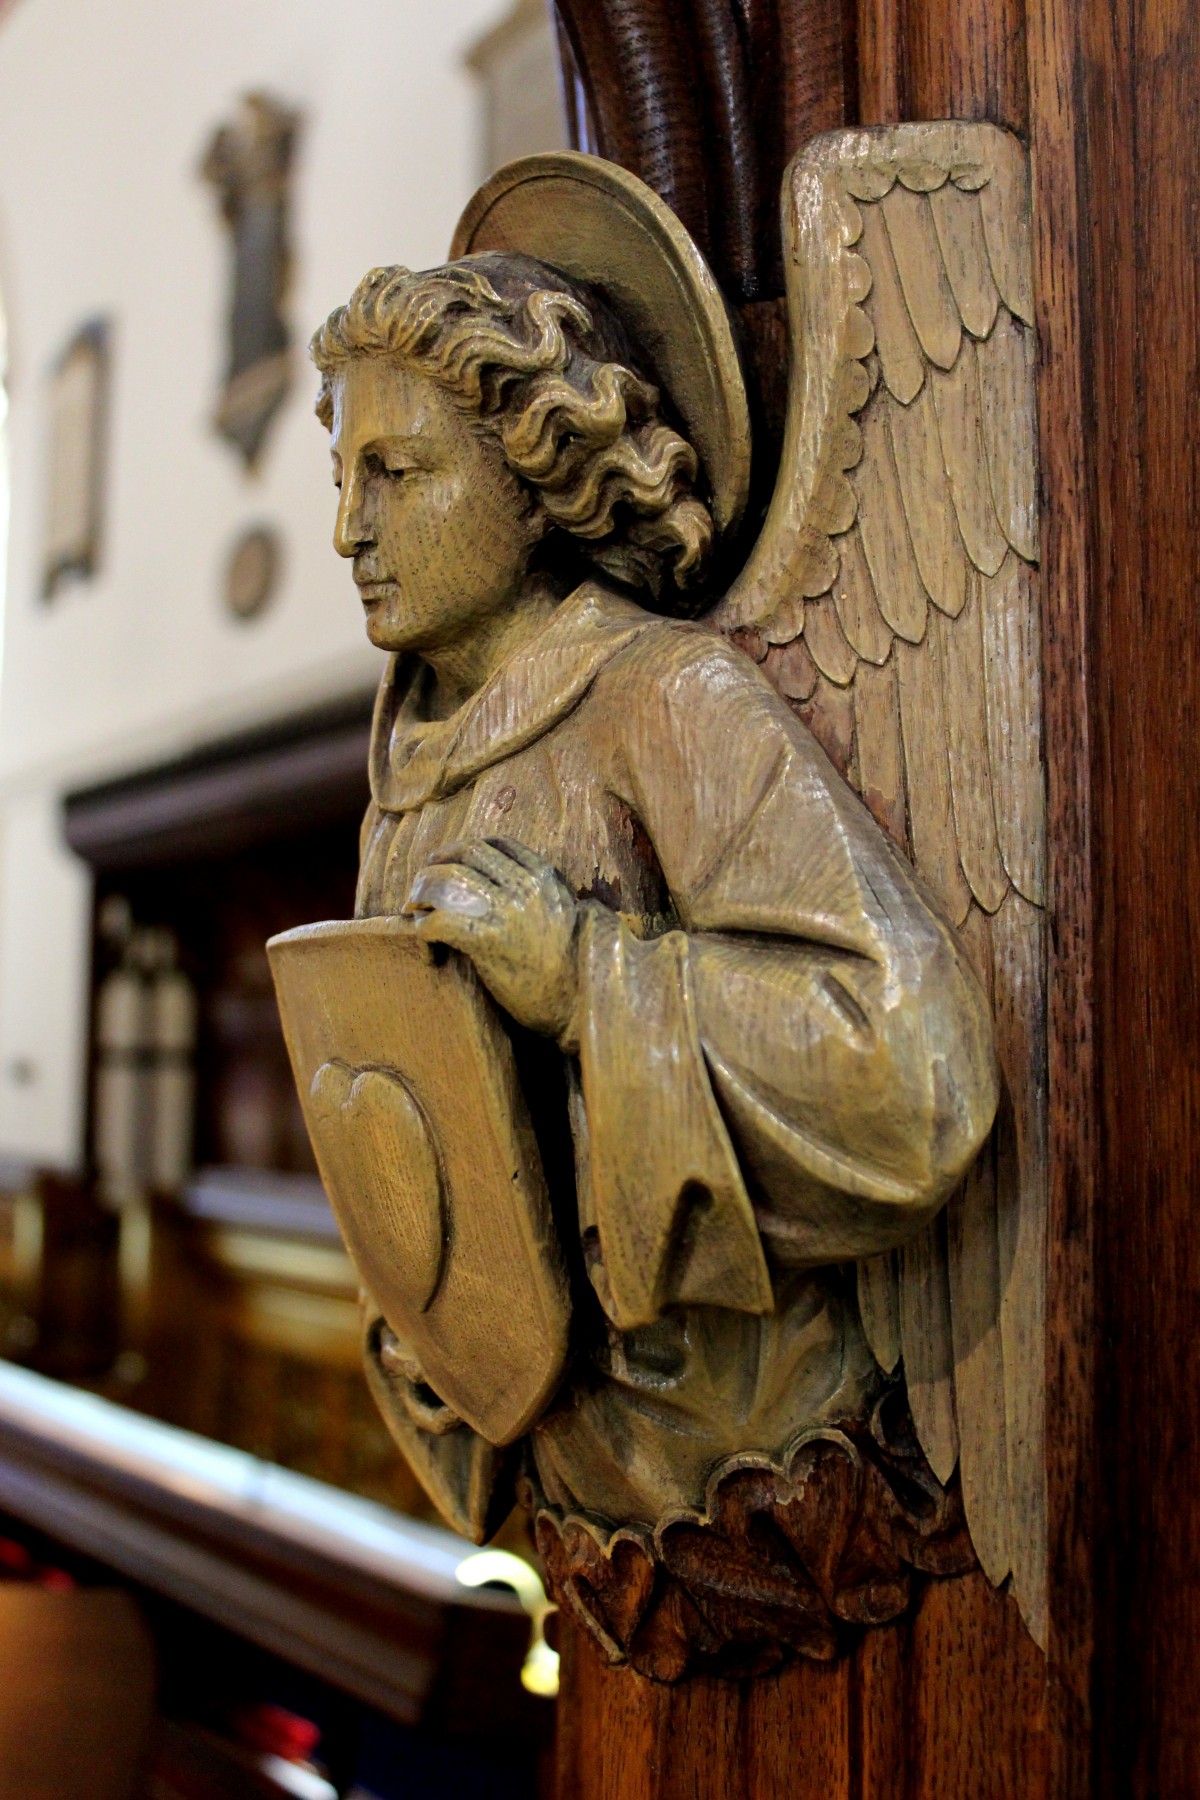 wood, monument, statue, heaven, religion, church, christian, spiritual, sculpture, religious, angel, art, temple, faith, wings, holy, carving, cherub, guardian, heavenly, angelic, angel wings, ancient history